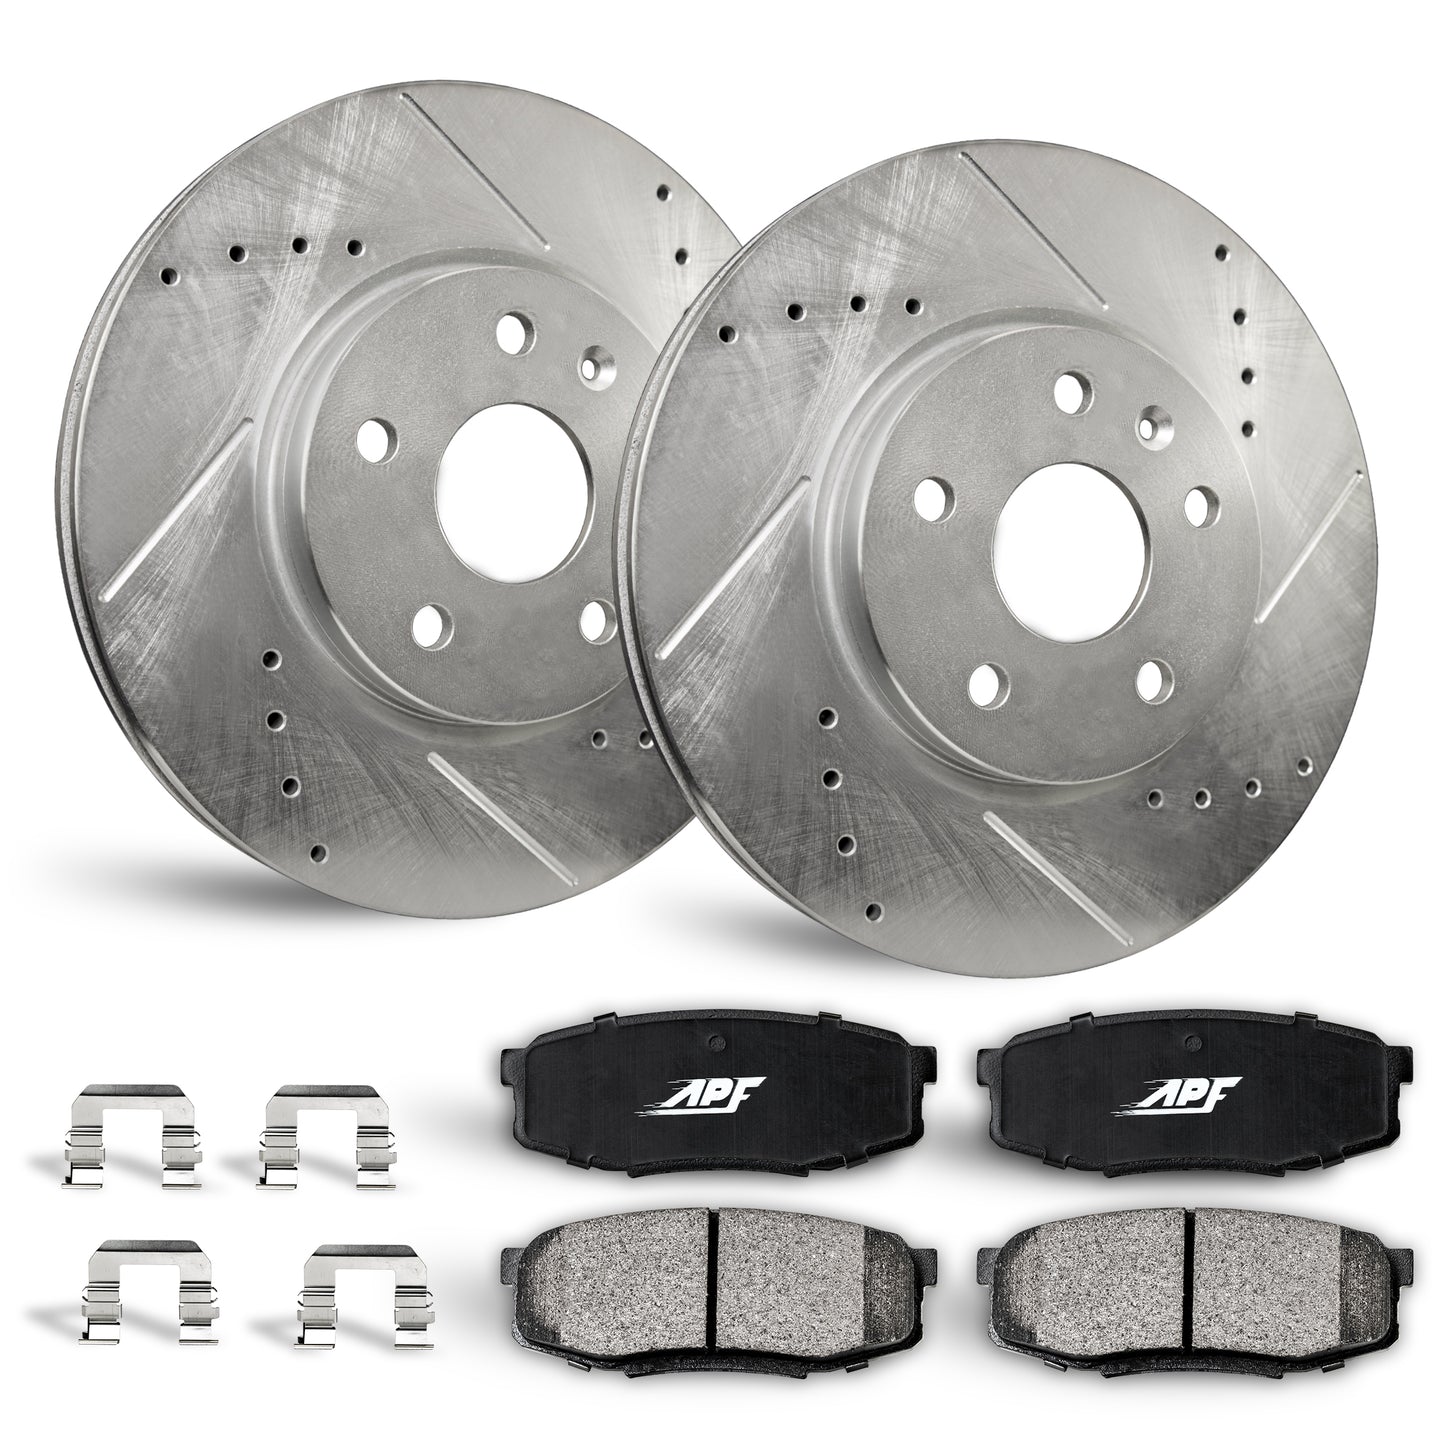 APF Rear Brake Kit compatible with INFINITI G35 2005-2008 | Zinc Drilled Slotted Rotors with Ceramic Carbon Fiber Brake Pads